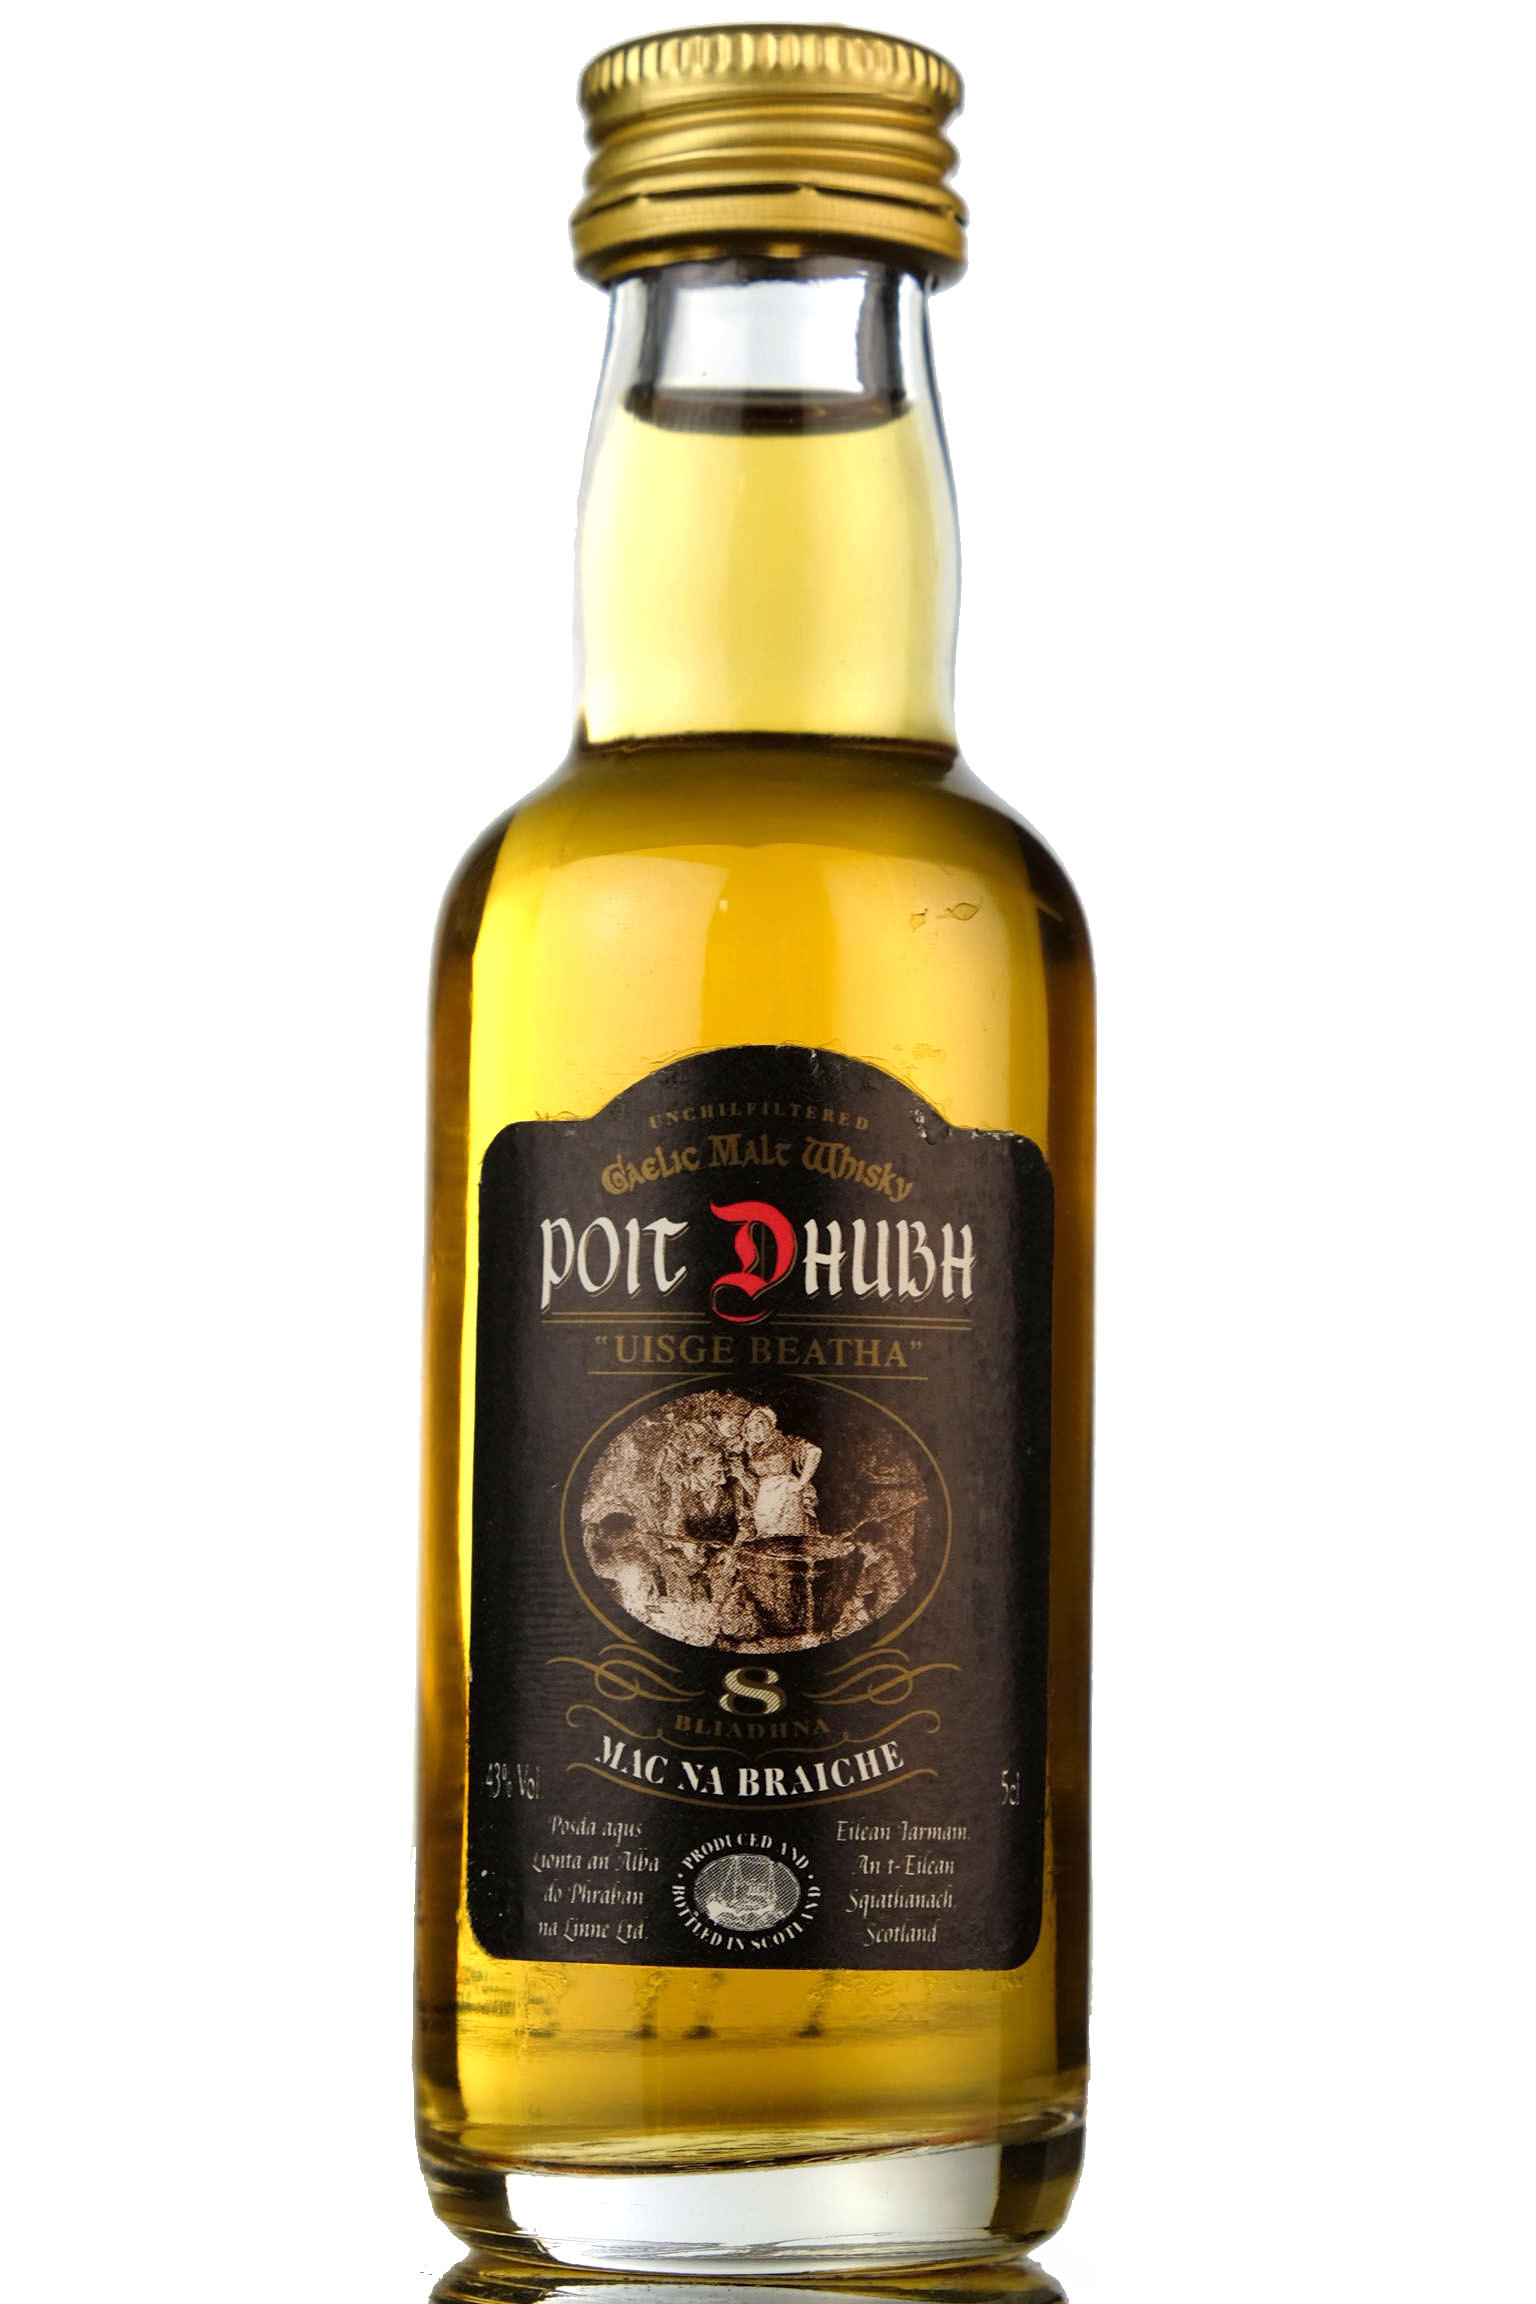 Poit Dhubh 8 Year Old Miniature